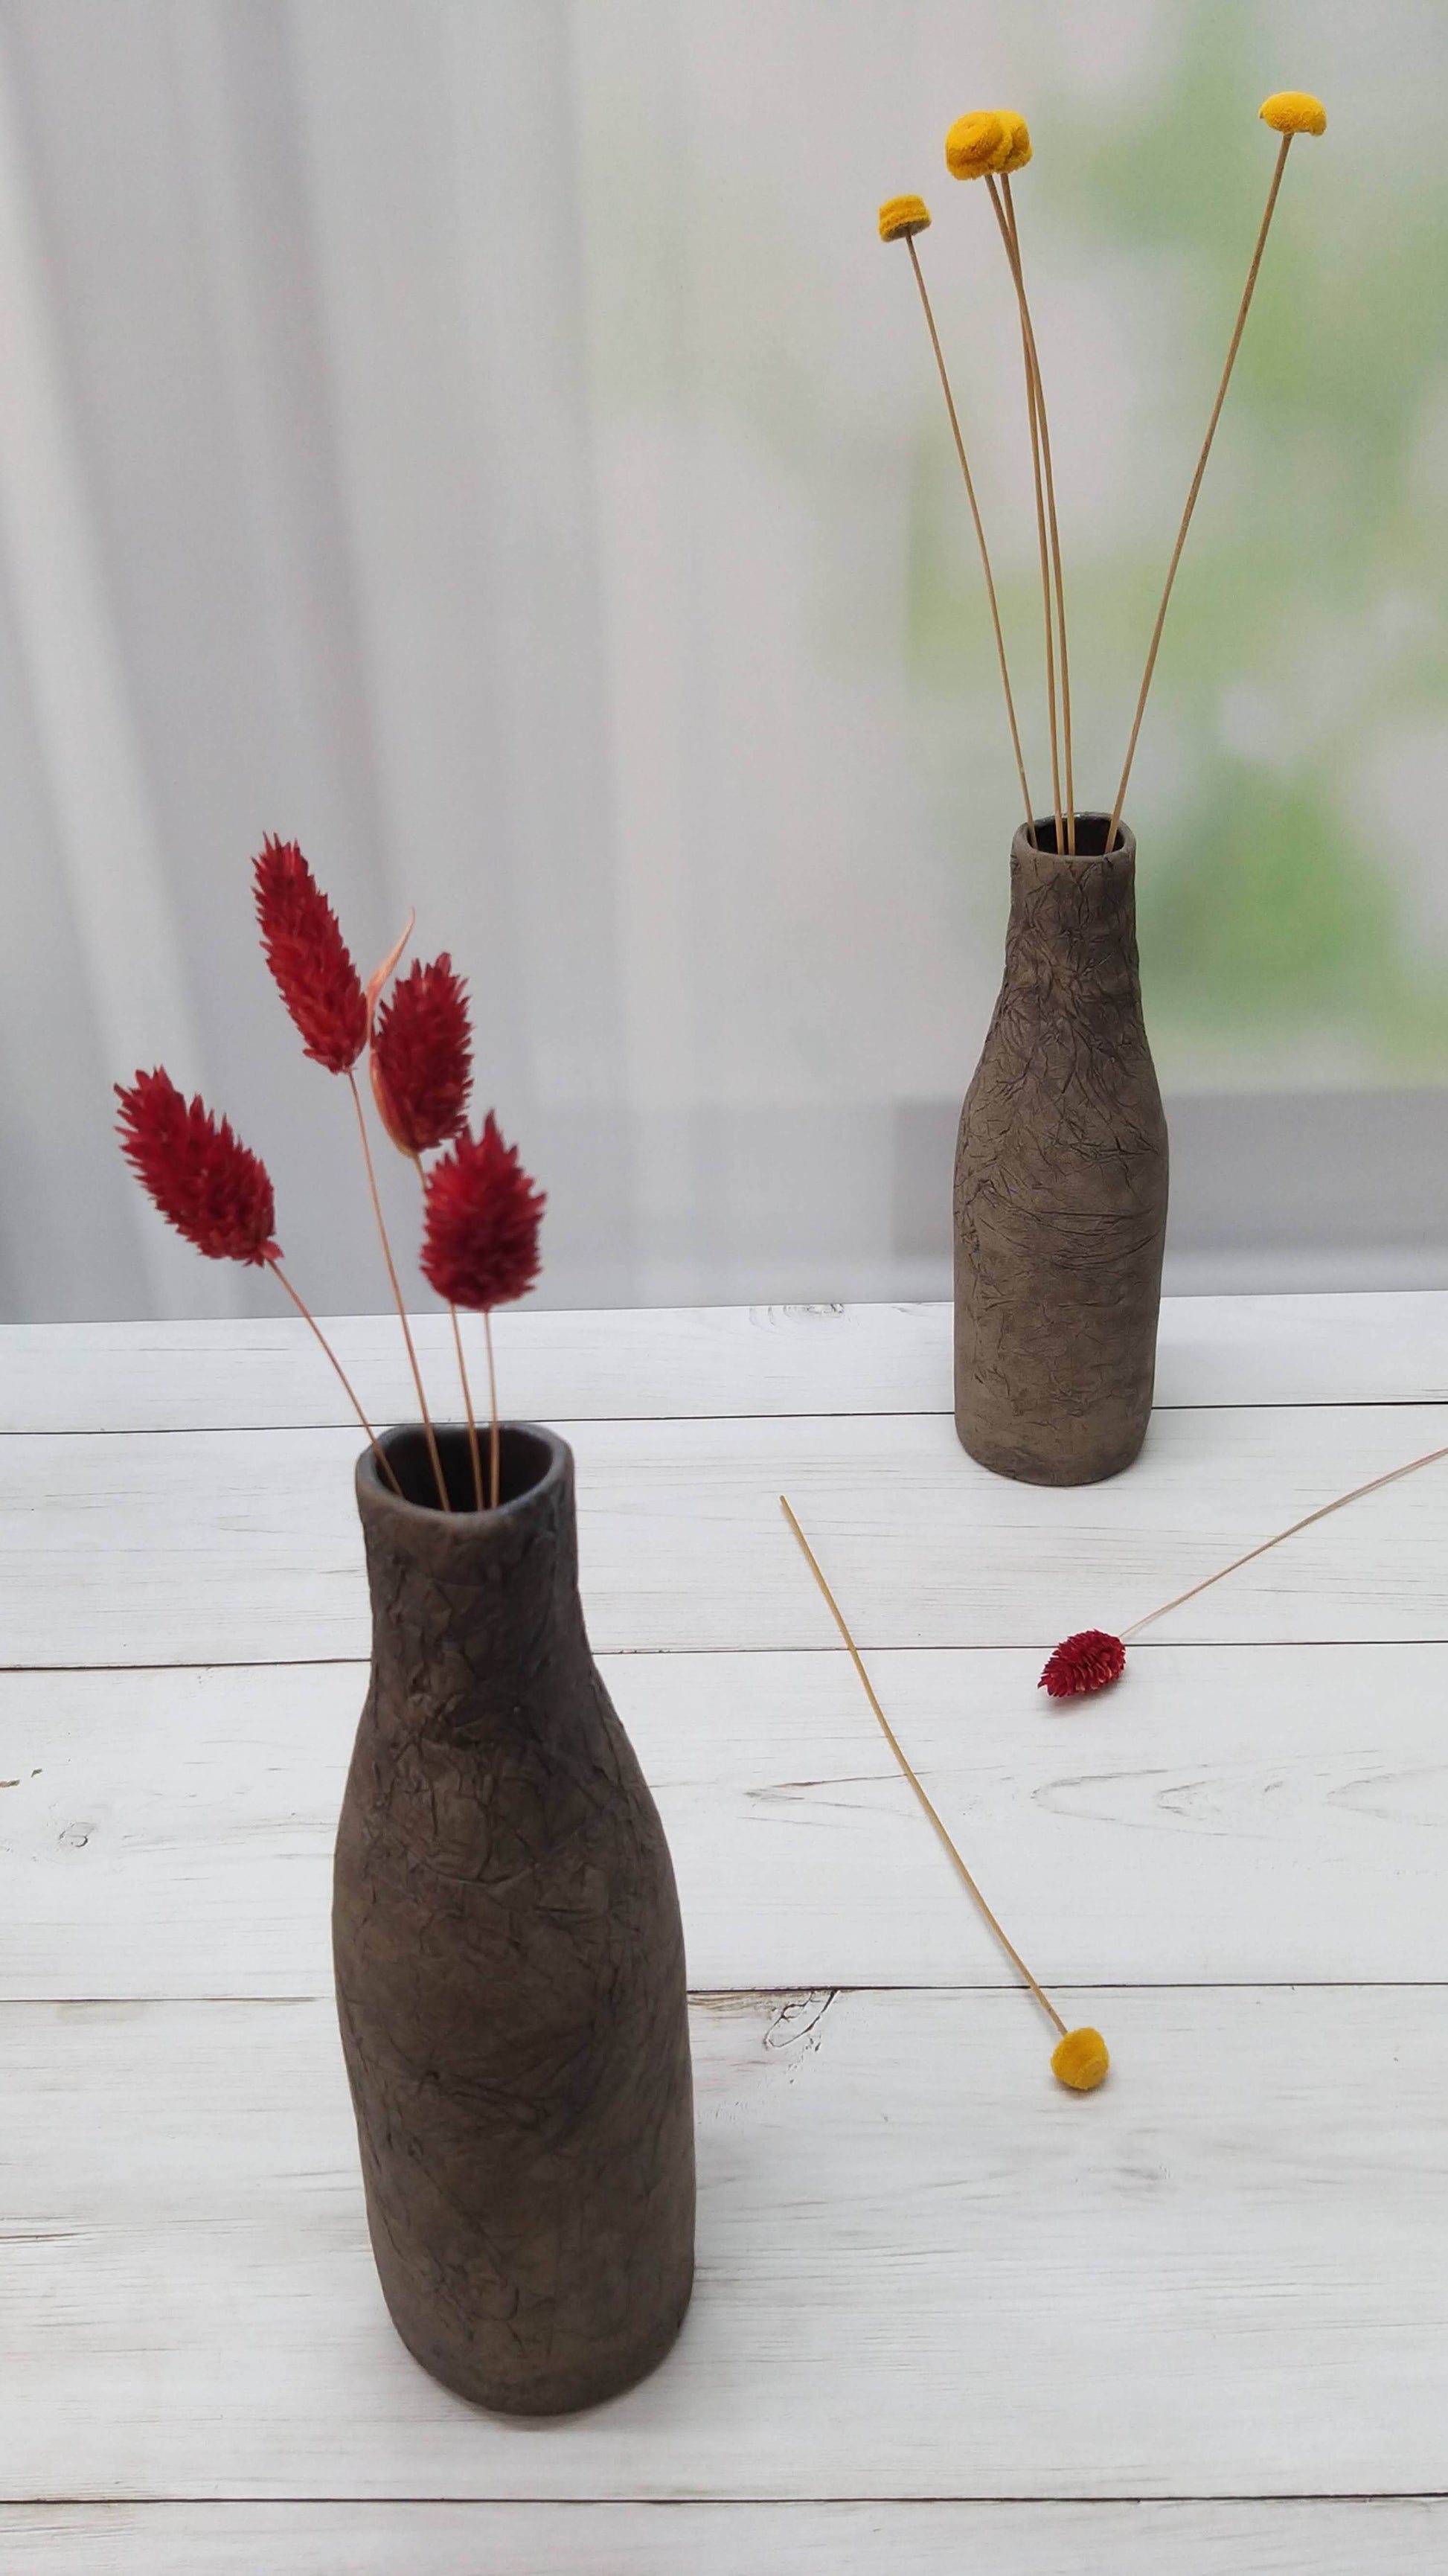 Contemporary Ceramic Bud Vases: Handmade, Modern, and Rustic Pottery for  Father's Day Gifts and Artistic Displays